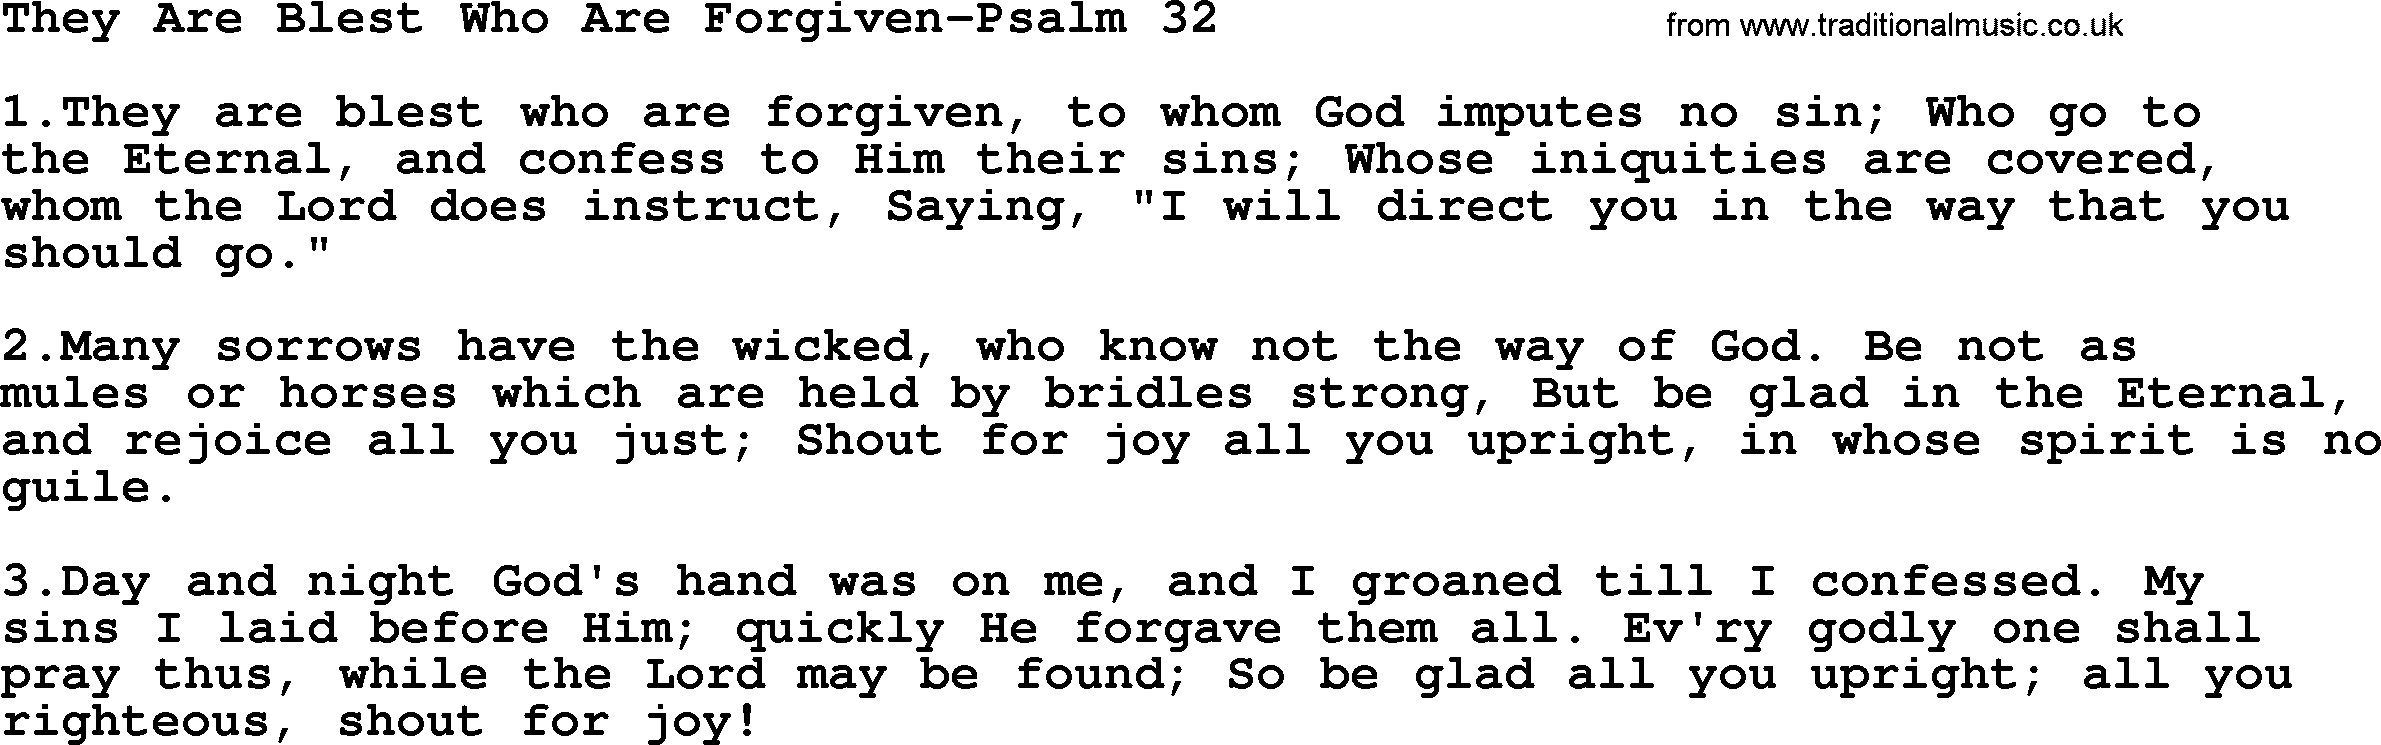 Hymns from the Psalms, Hymn: They Are Blest Who Are Forgiven-Psalm 32, lyrics with PDF